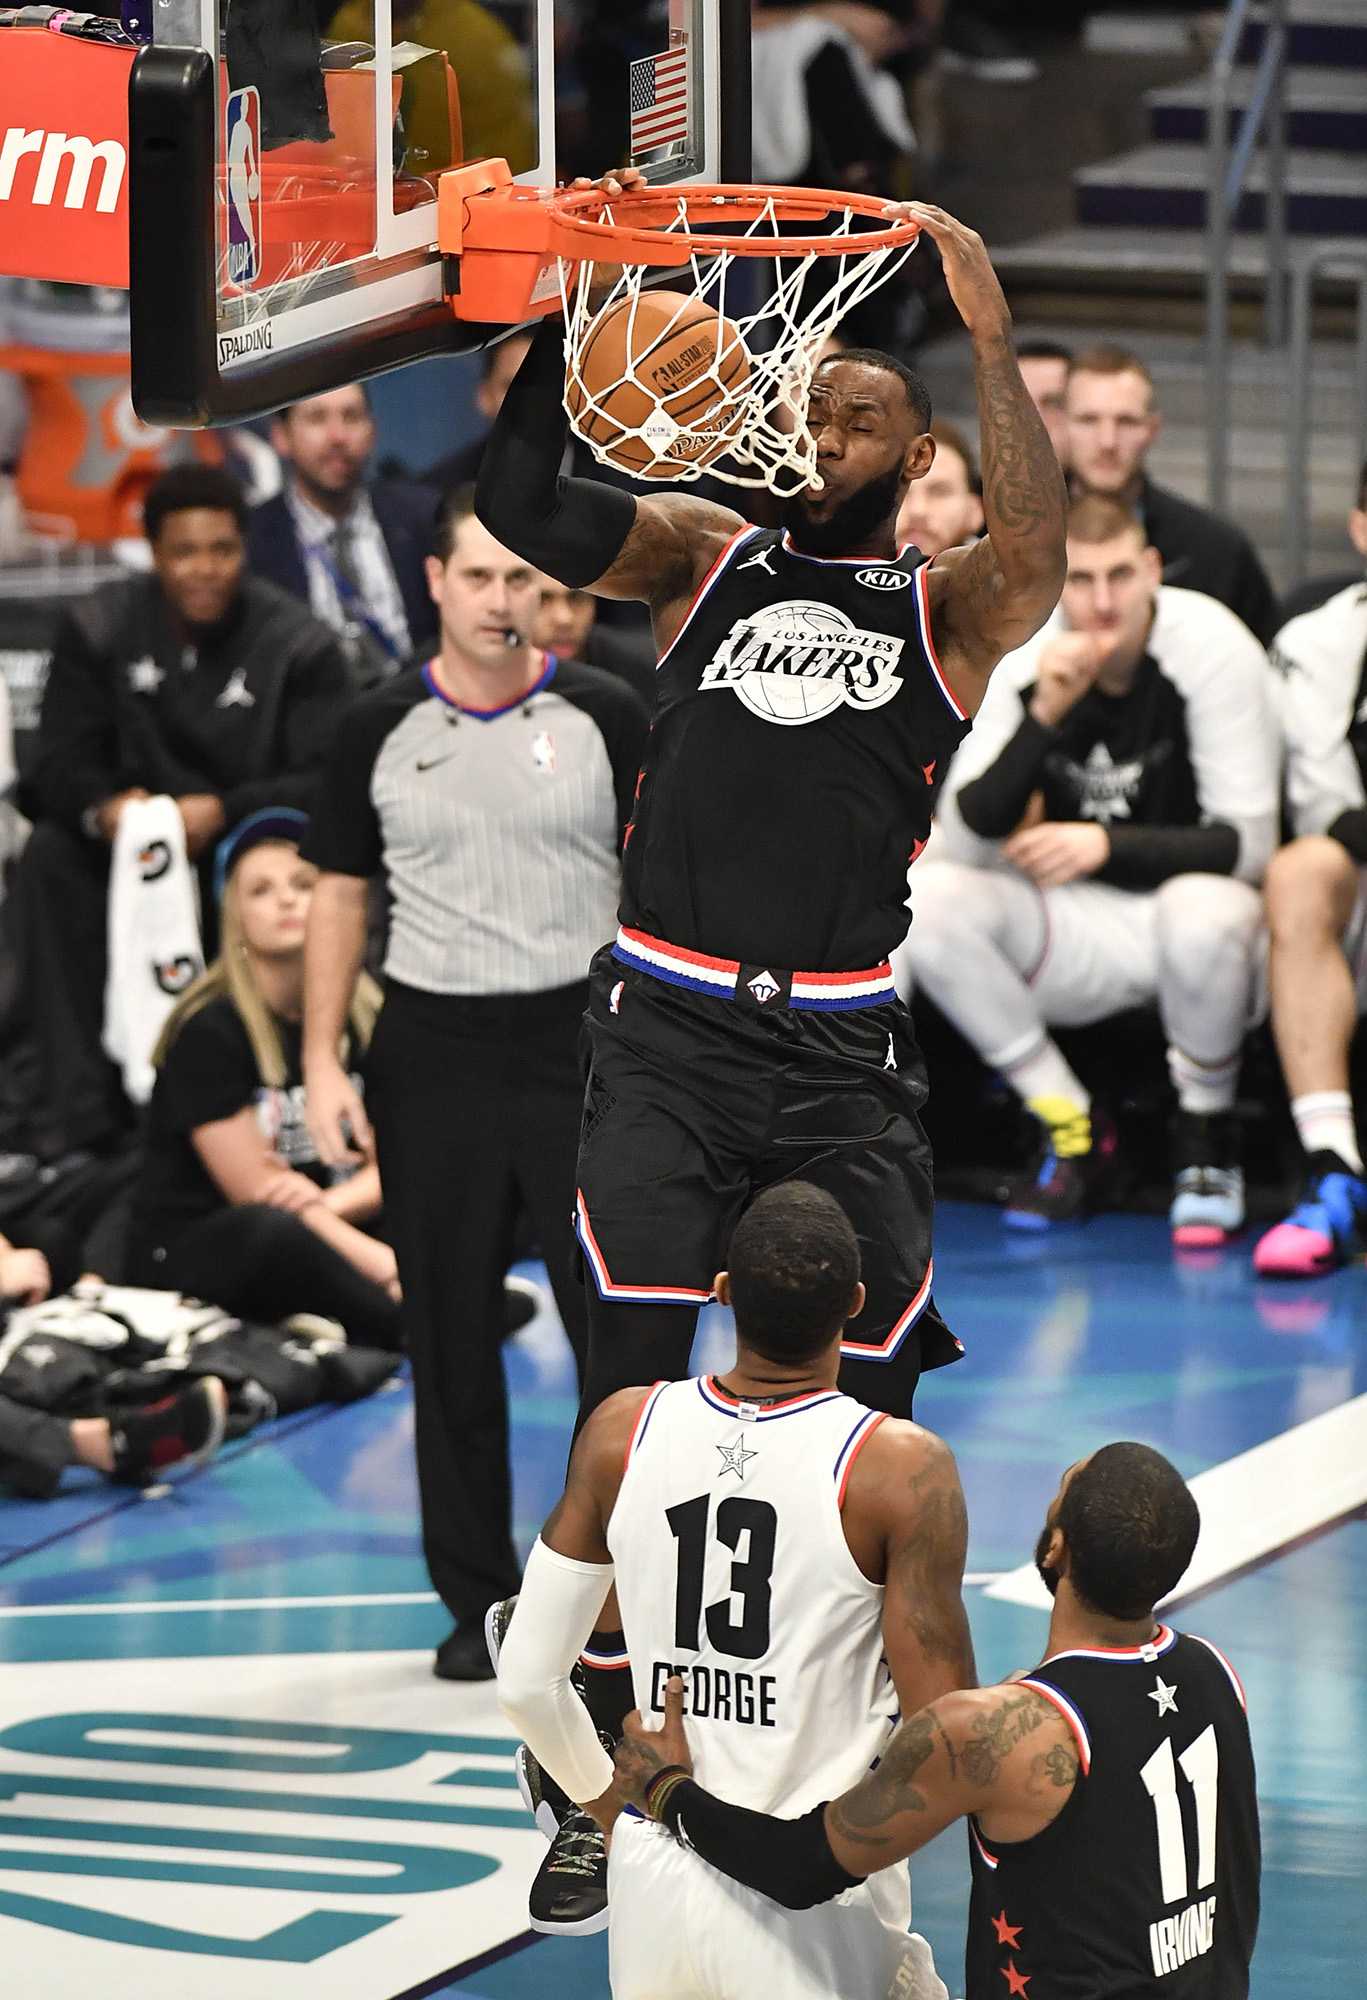 Team LeBrons LeBron James, of the Los Angeles Lakers, goes up for a dunk against Team Giannis Paul George, of the Oklahoma City Thunder, during the second half of the 2019 NBA All-Star 2019 game at Spectrum Center in Charlotte, N.C. on Sunday, February 17, 2019. (David T. Foster III/Charlotte Observer/TNS)